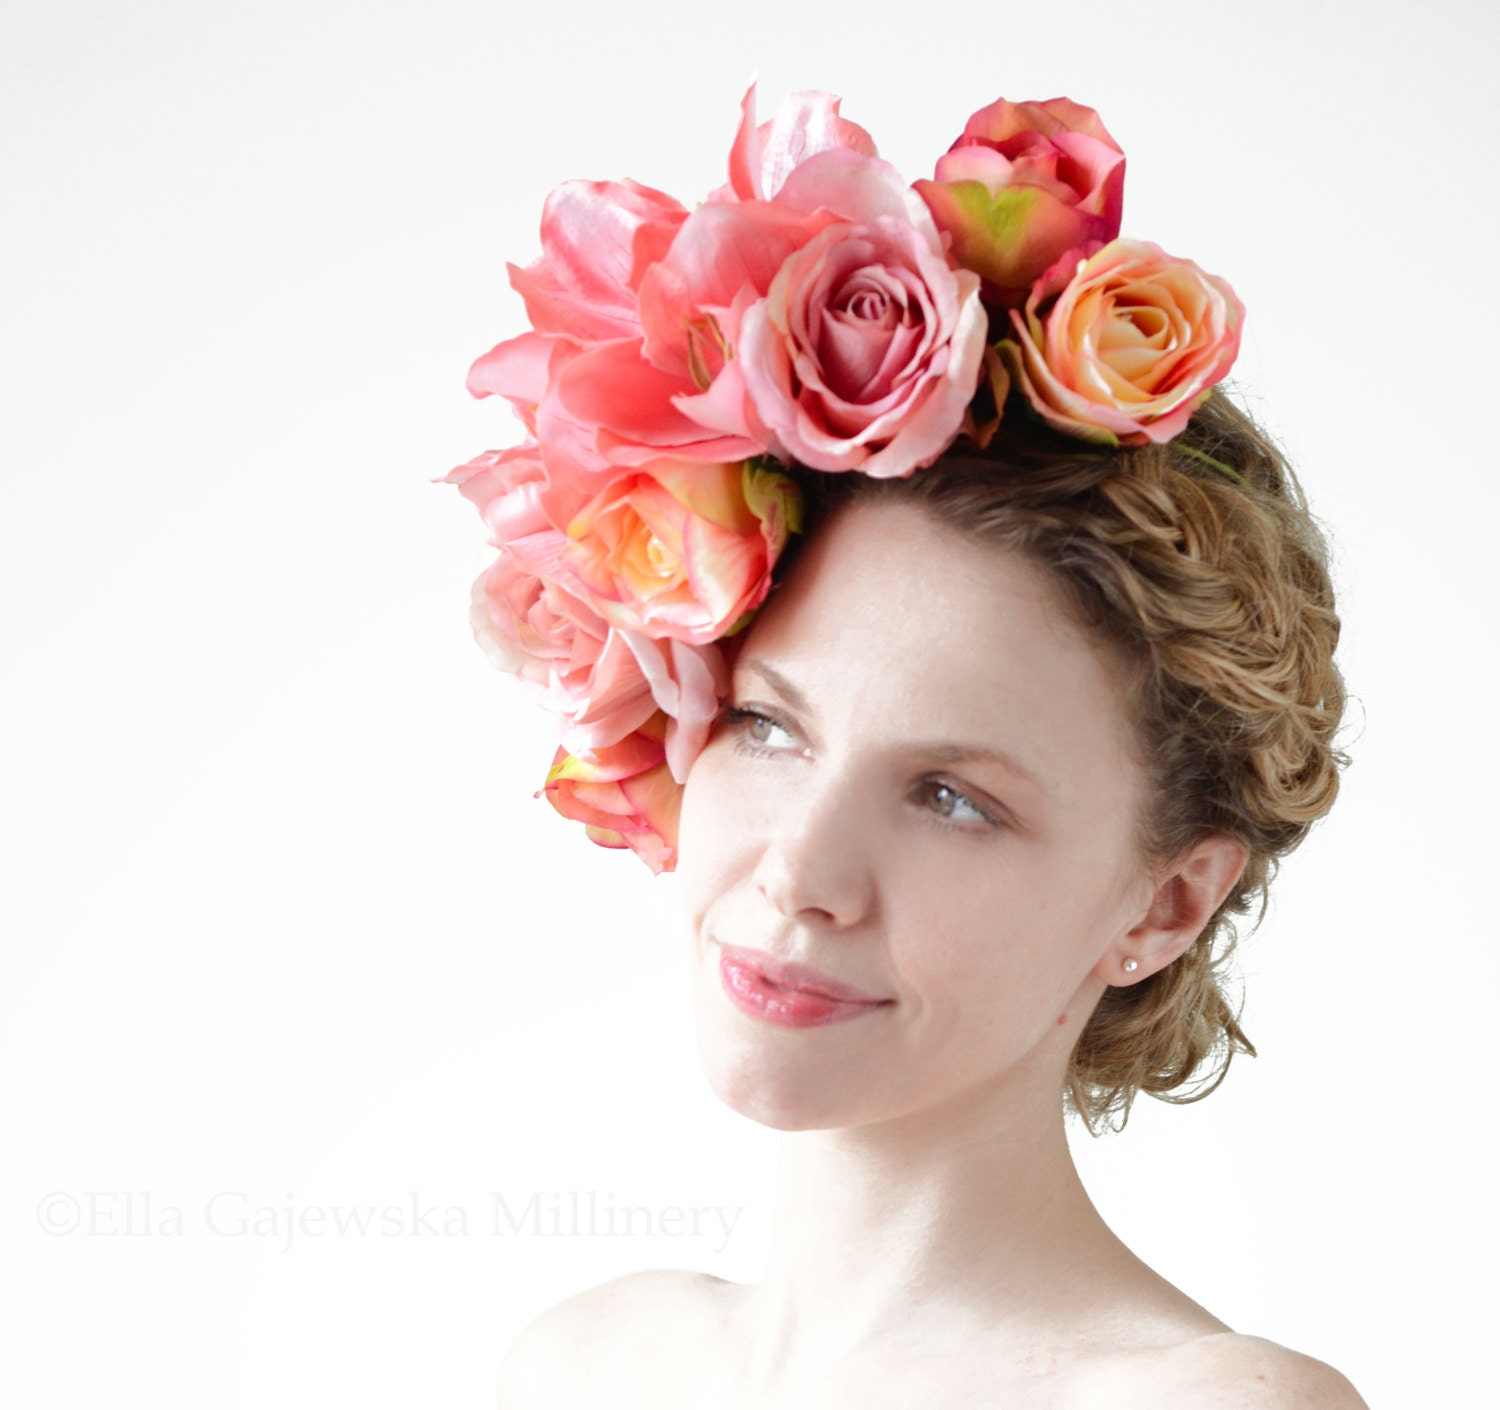 Floral Crown - Coral Rose Lilly - Fabric Flowers Pink Powder - Oversized Pinks Headpiece Wreath Wedding Whimsical Bridal Garden Summer Party - EllaGajewskaHATS